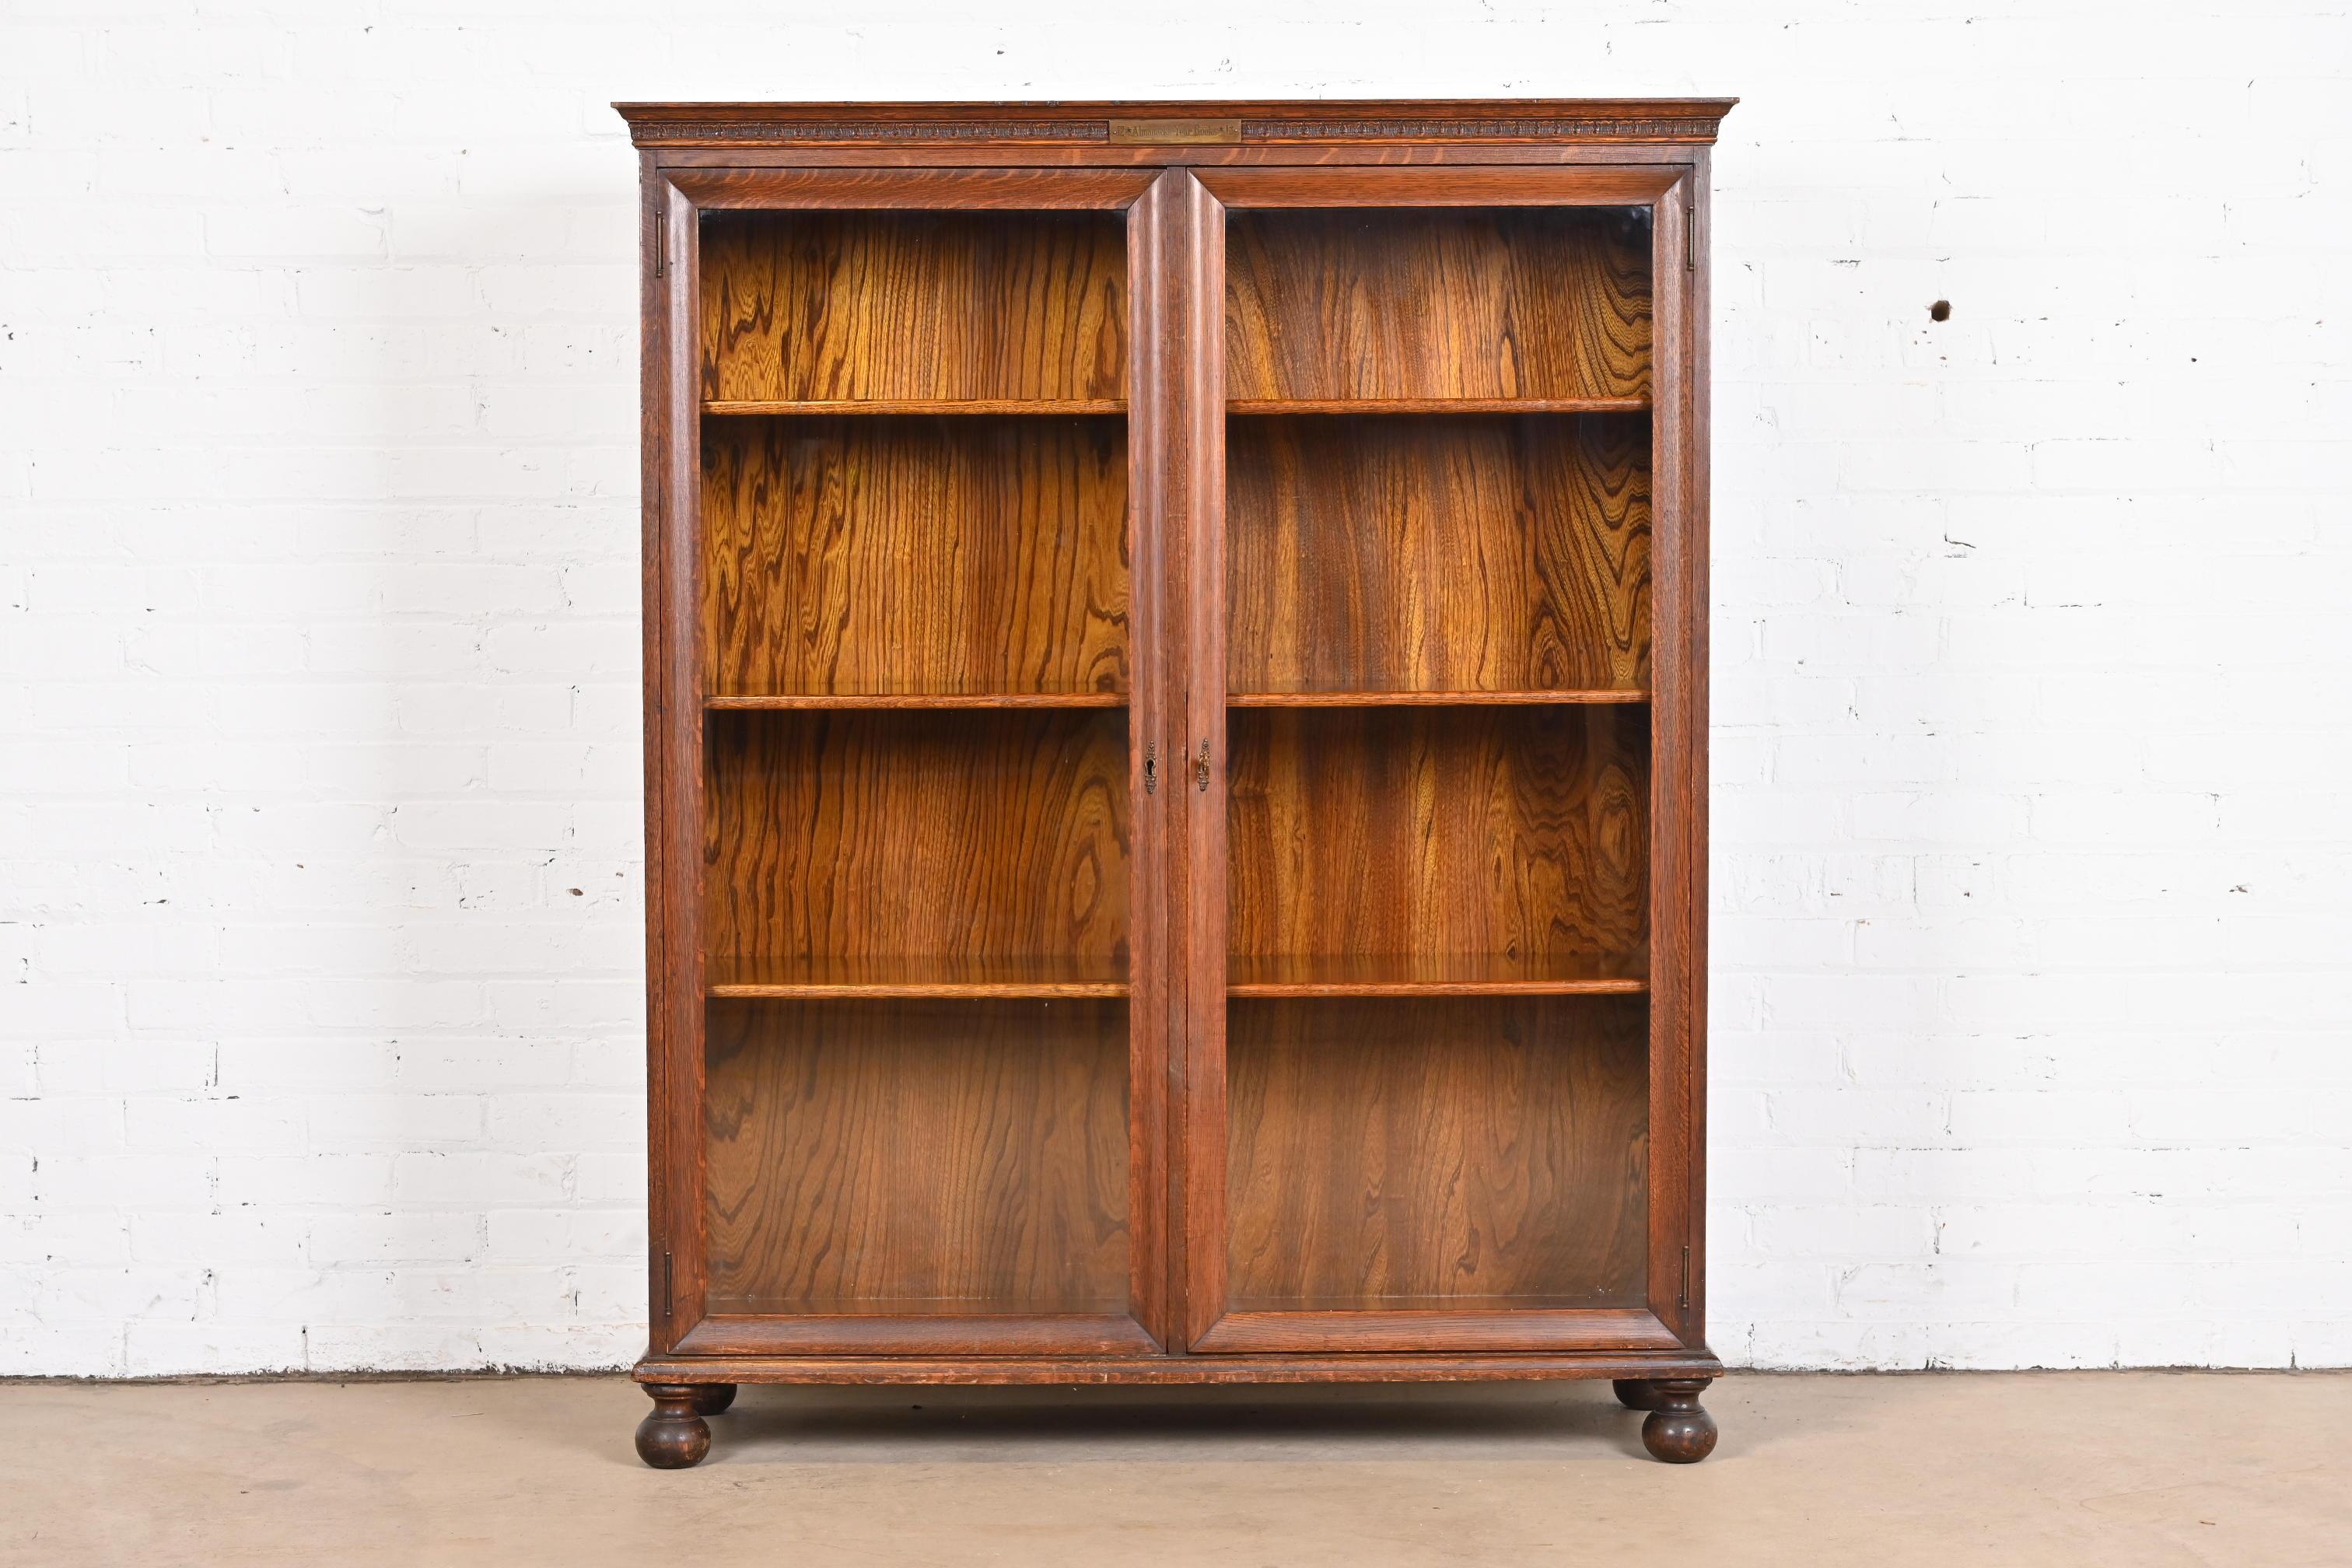 A beautiful antique Arts & Crafts or American Empire double bookcase cabinet

In the manner of Stickley Brothers

USA, circa 1900

Carved oak, with glass front doors and original brass hardware. Cabinet locks, and key is included.

Measures: